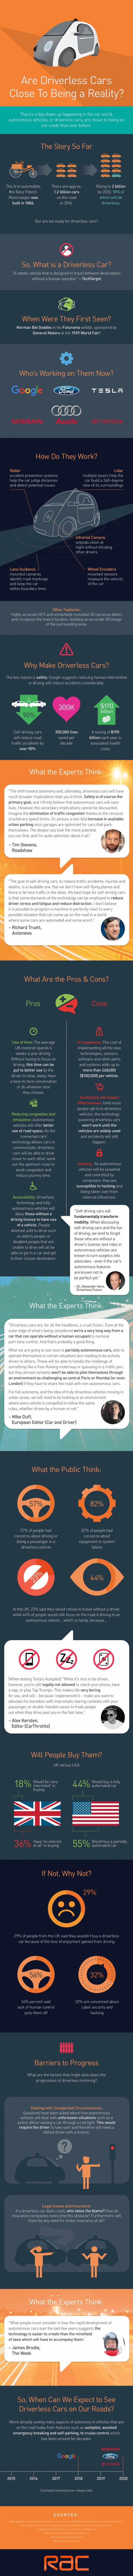 Everything about the future of Driverless Cars- infographic 